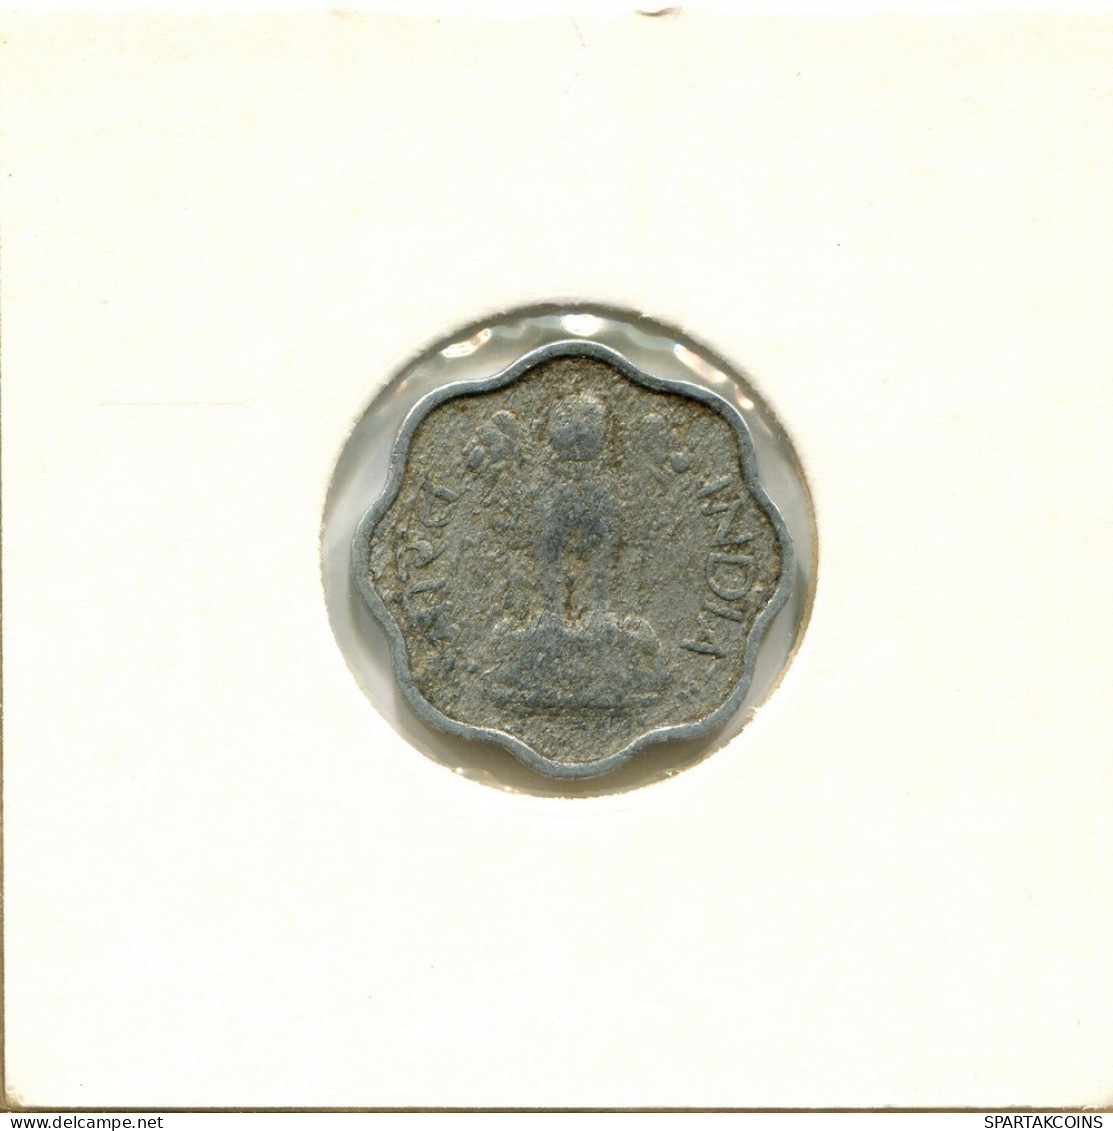 2 PAISE 1965 INDE INDIA Pièce #AY717.F.A - Indien